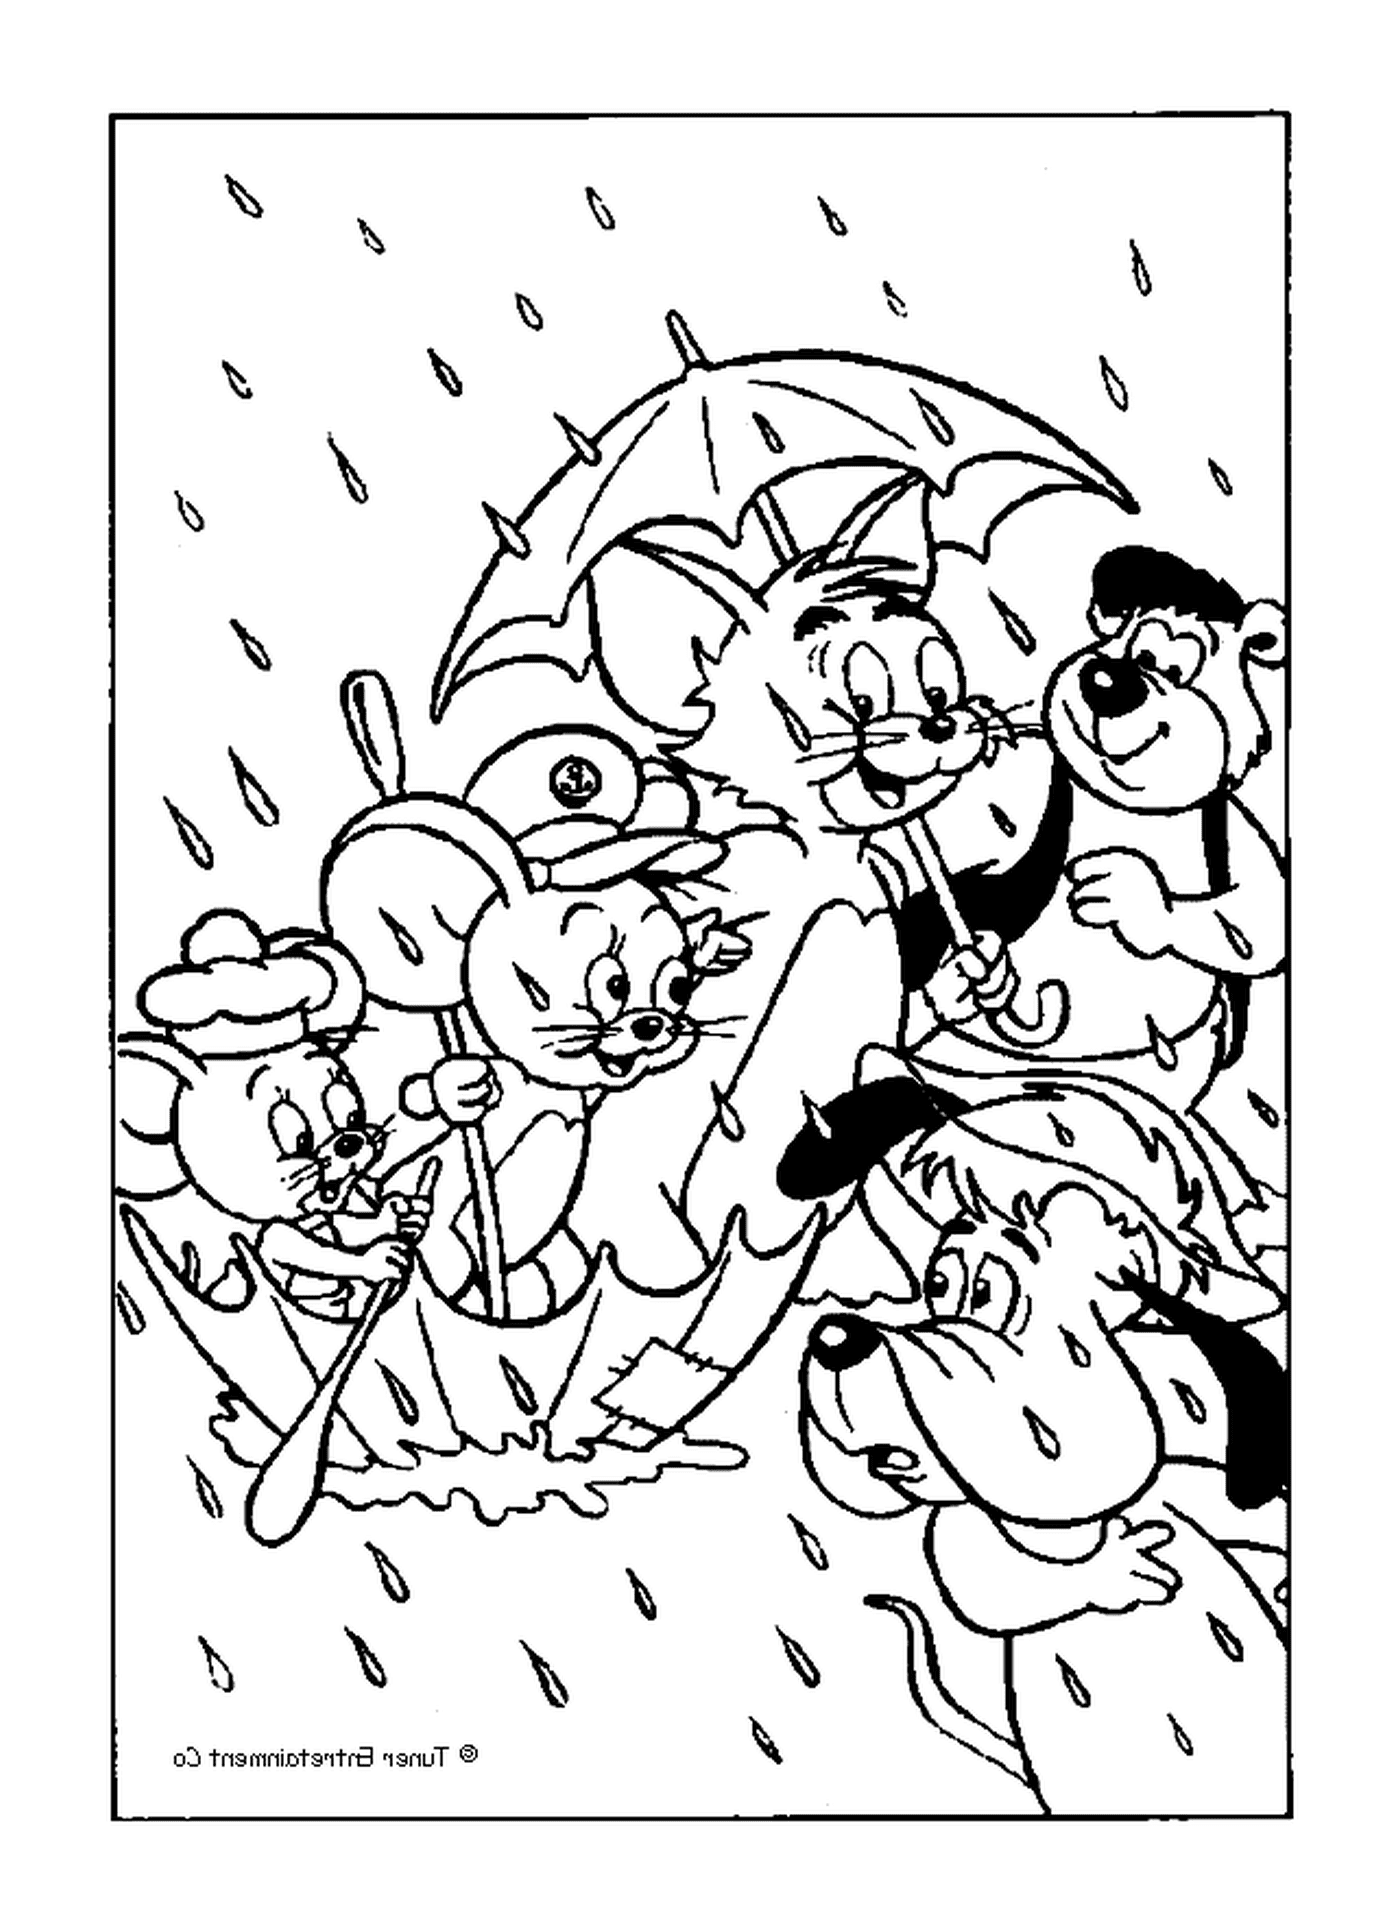  Tom and Jerry in the rain 